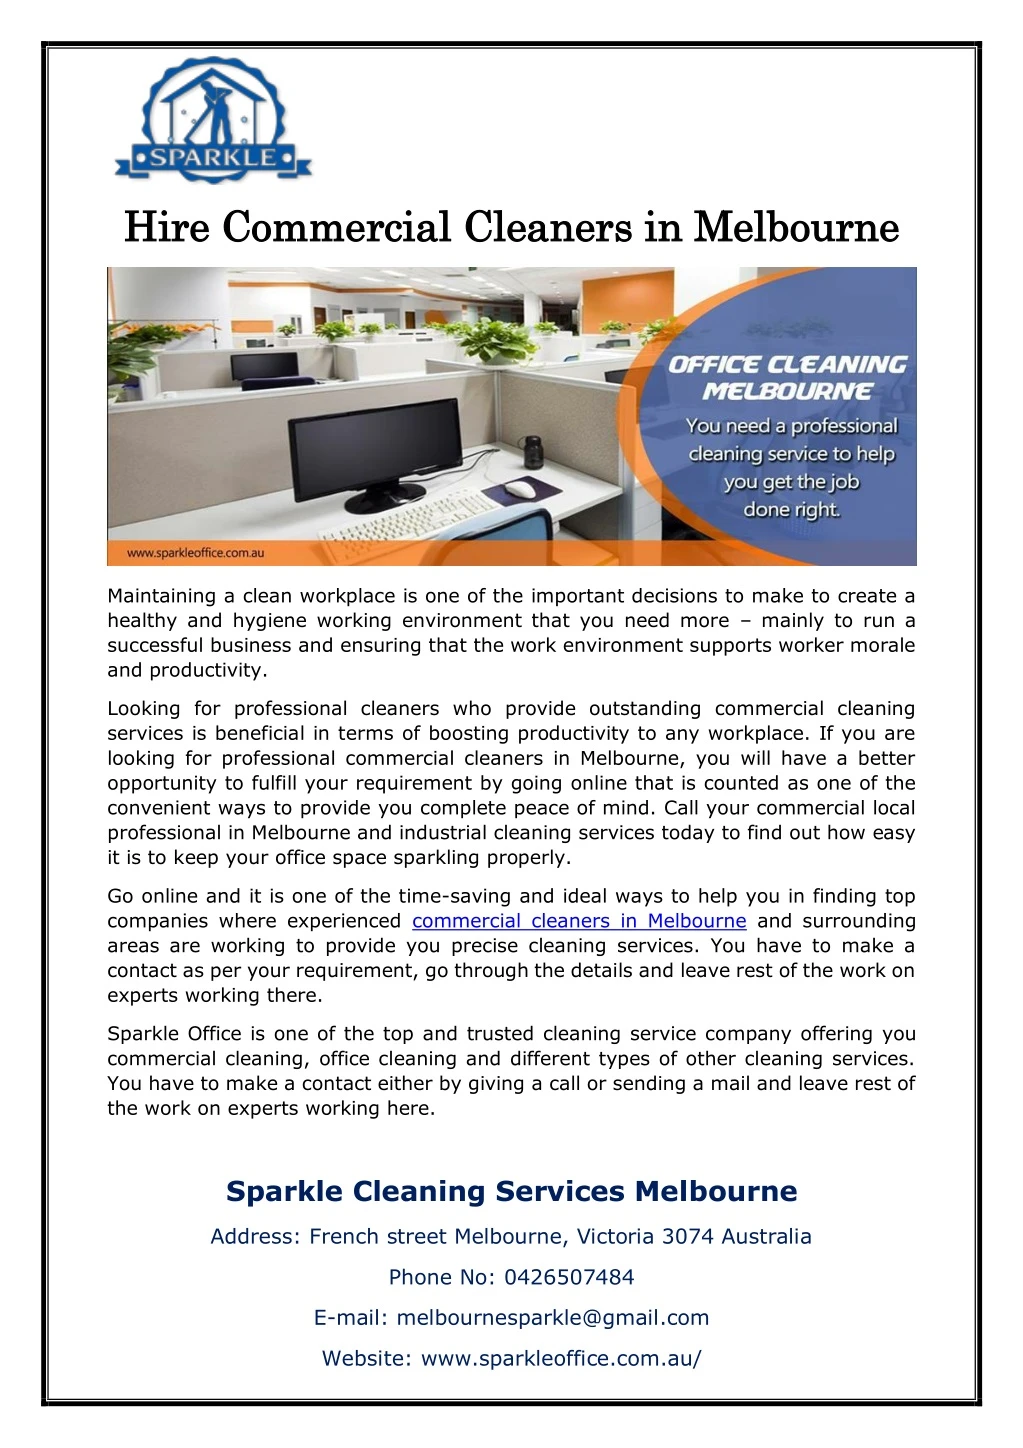 hire commercial cleaners in melbourne hire